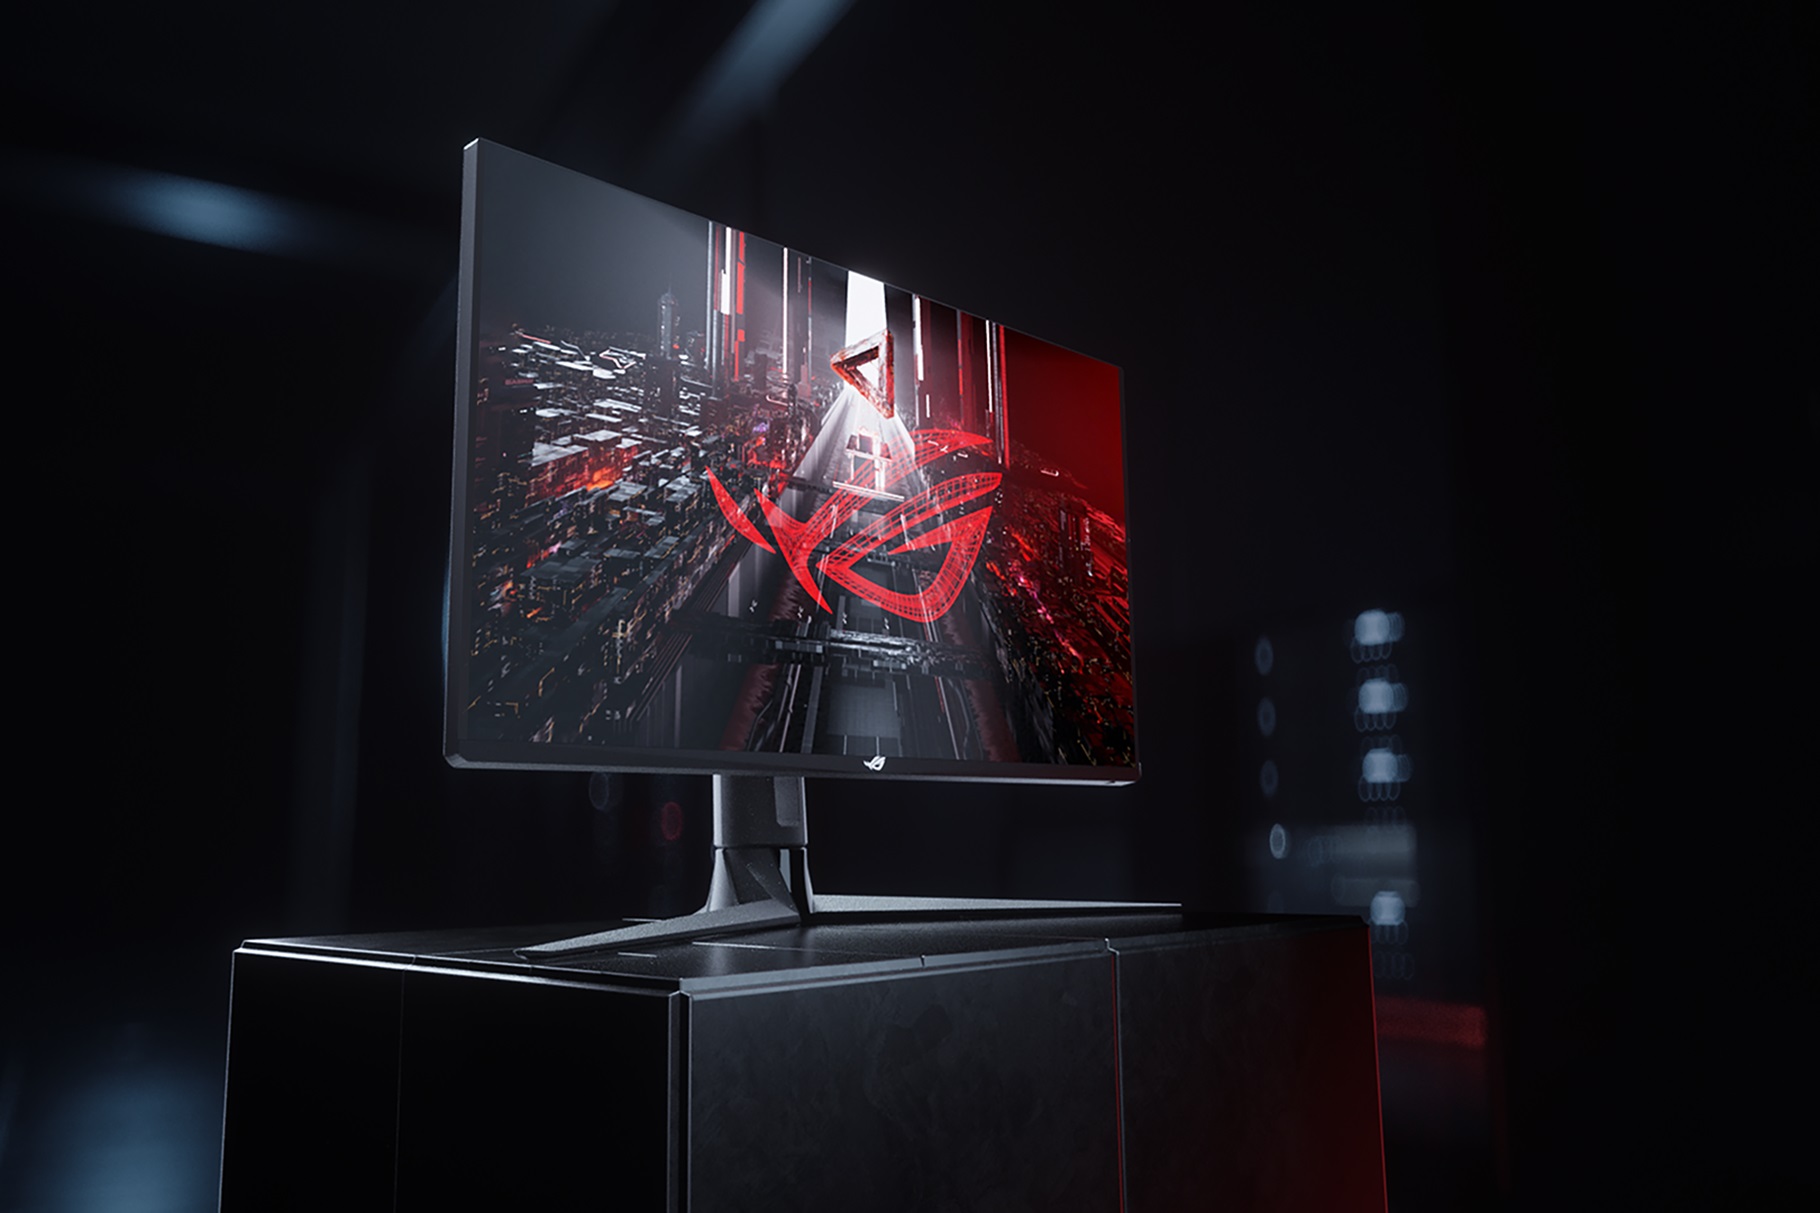 Asus Launches 43-inch ROG Strix Gaming Monitor with HDMI 2.1